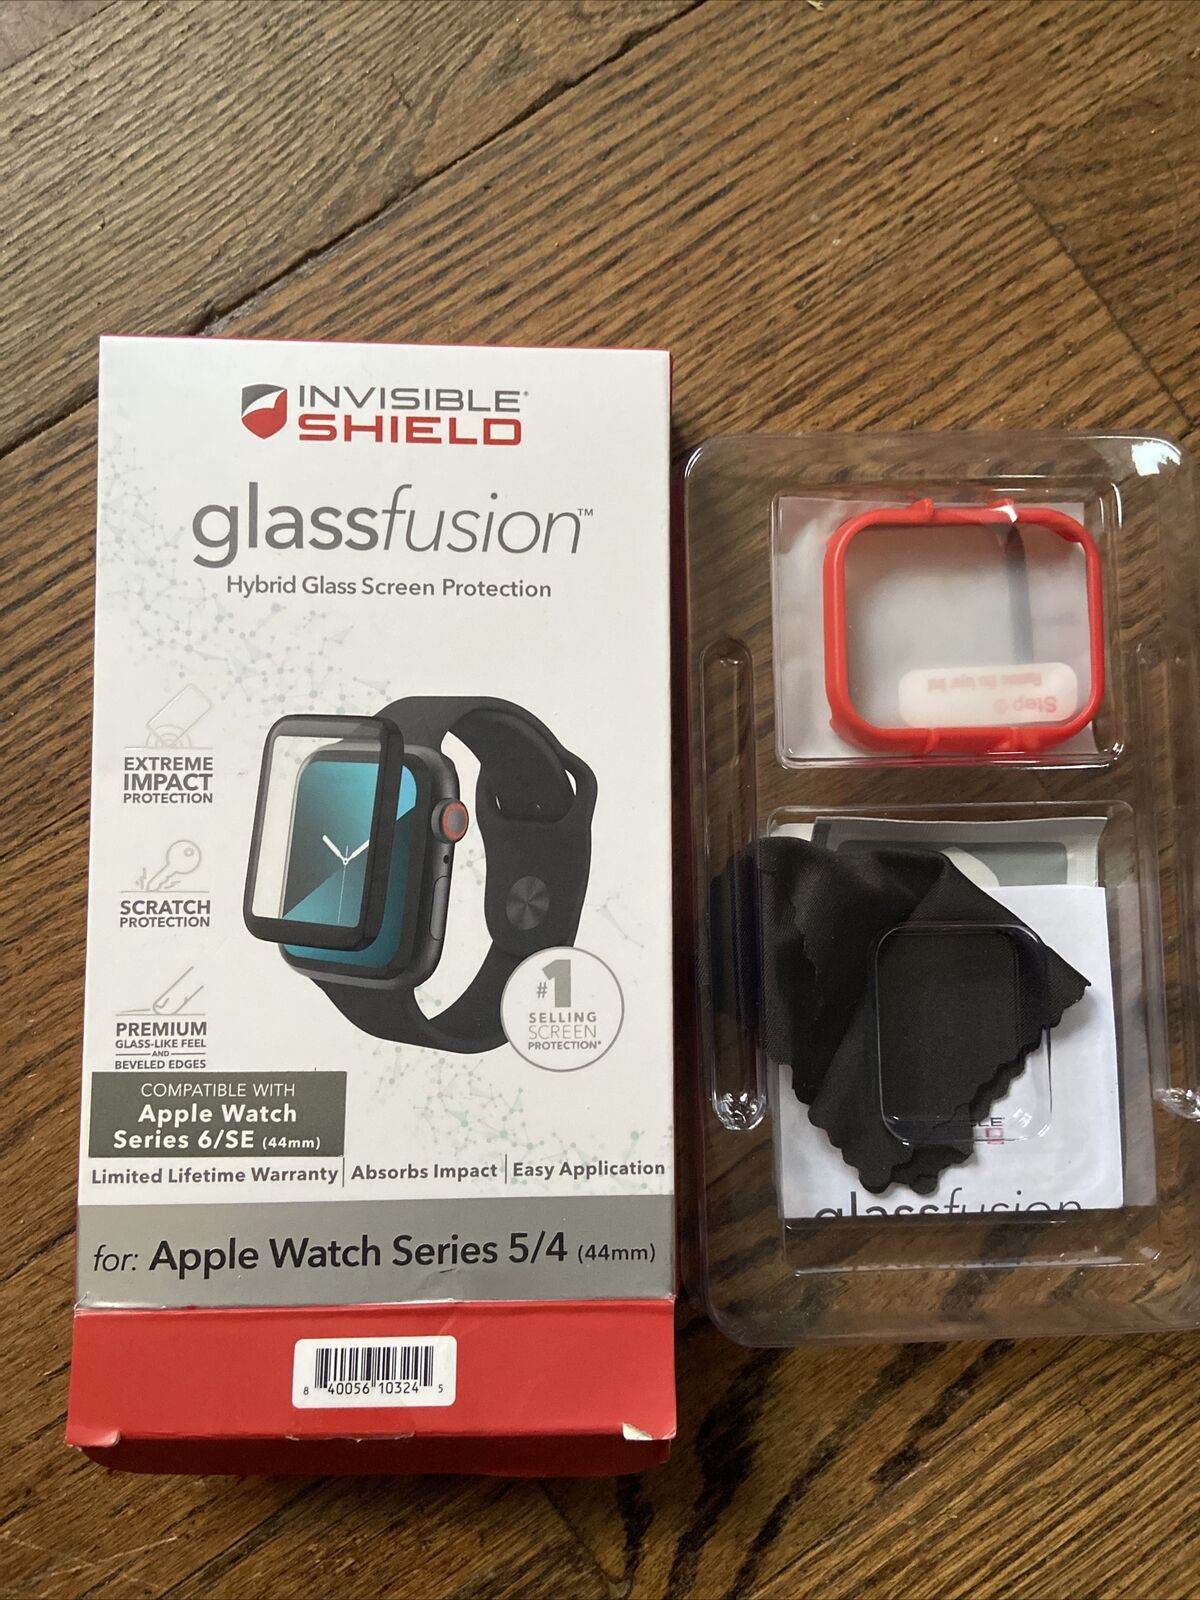 Invisible Shield Glass Fusion For Apple Watch Series 5/4 (44mm)  065